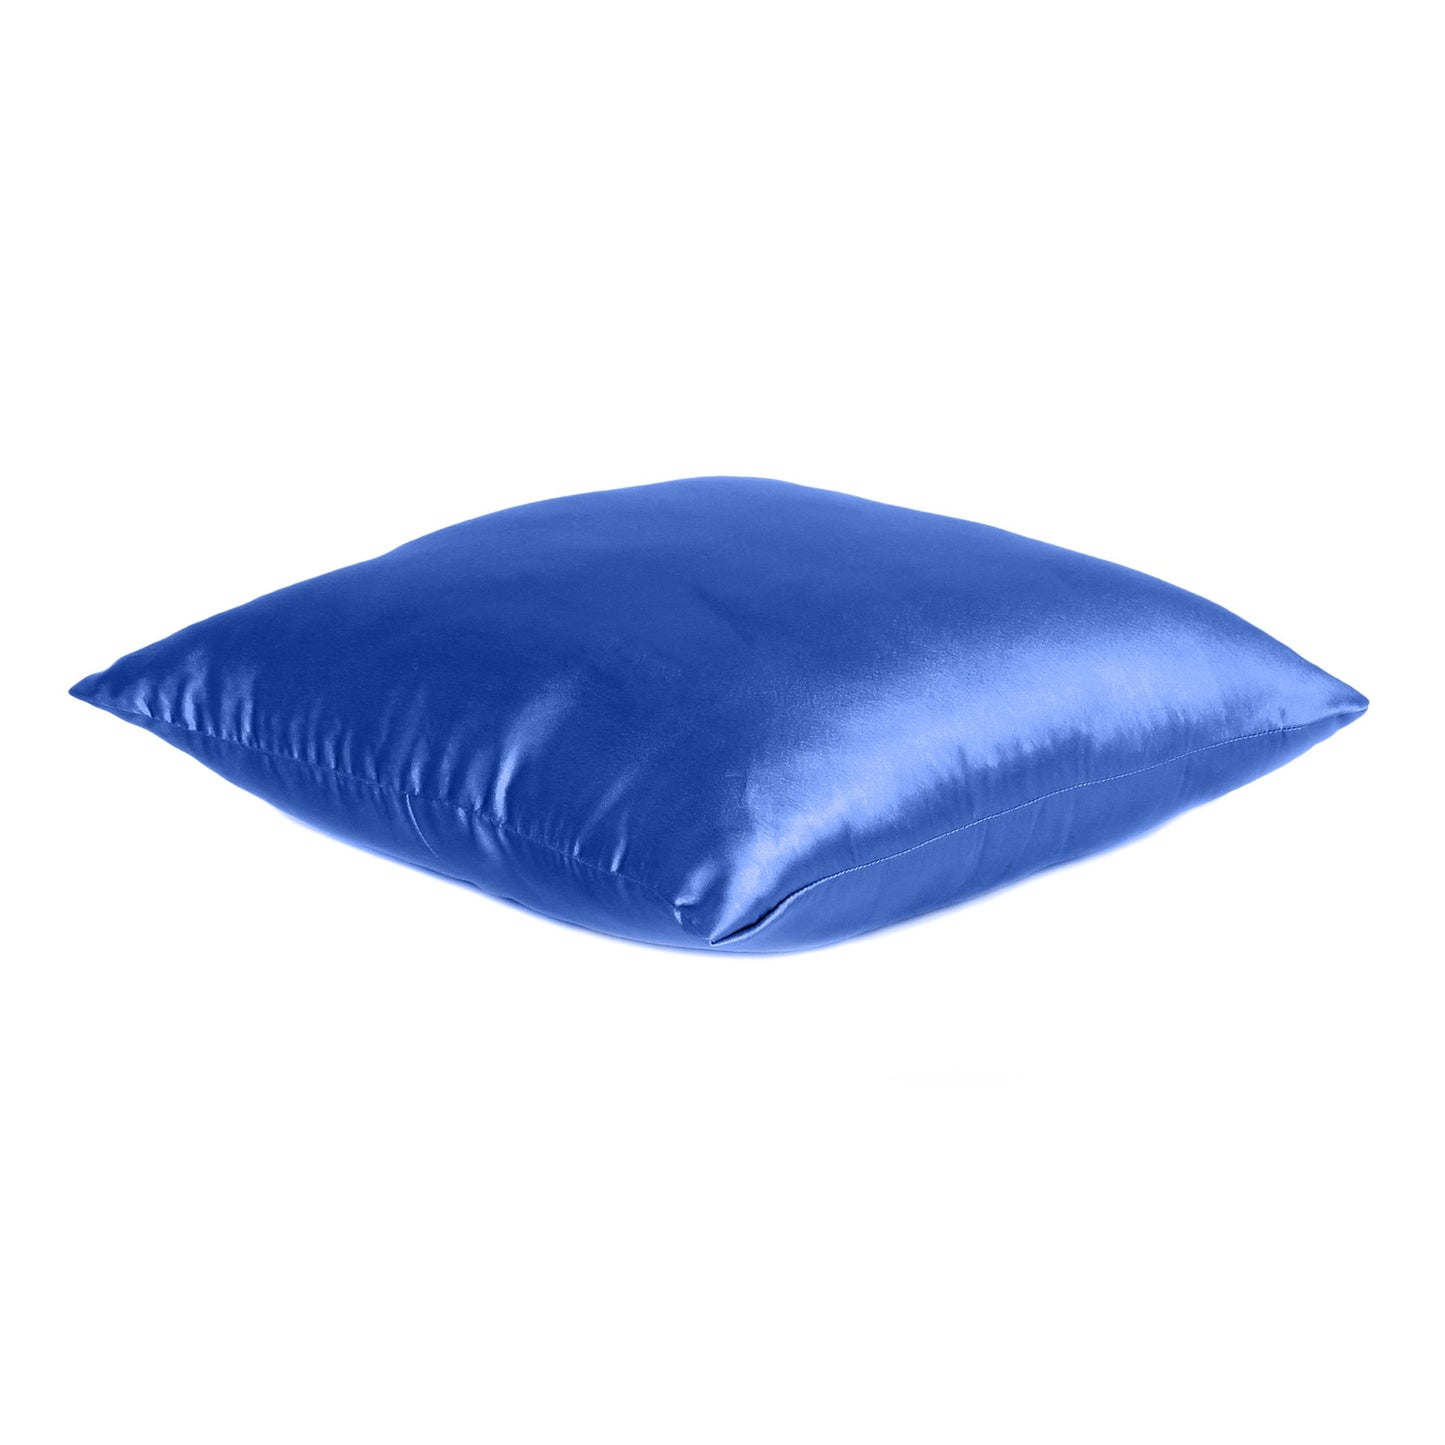 Navy Blue Satin Silky Cushion Covers in Set of 2